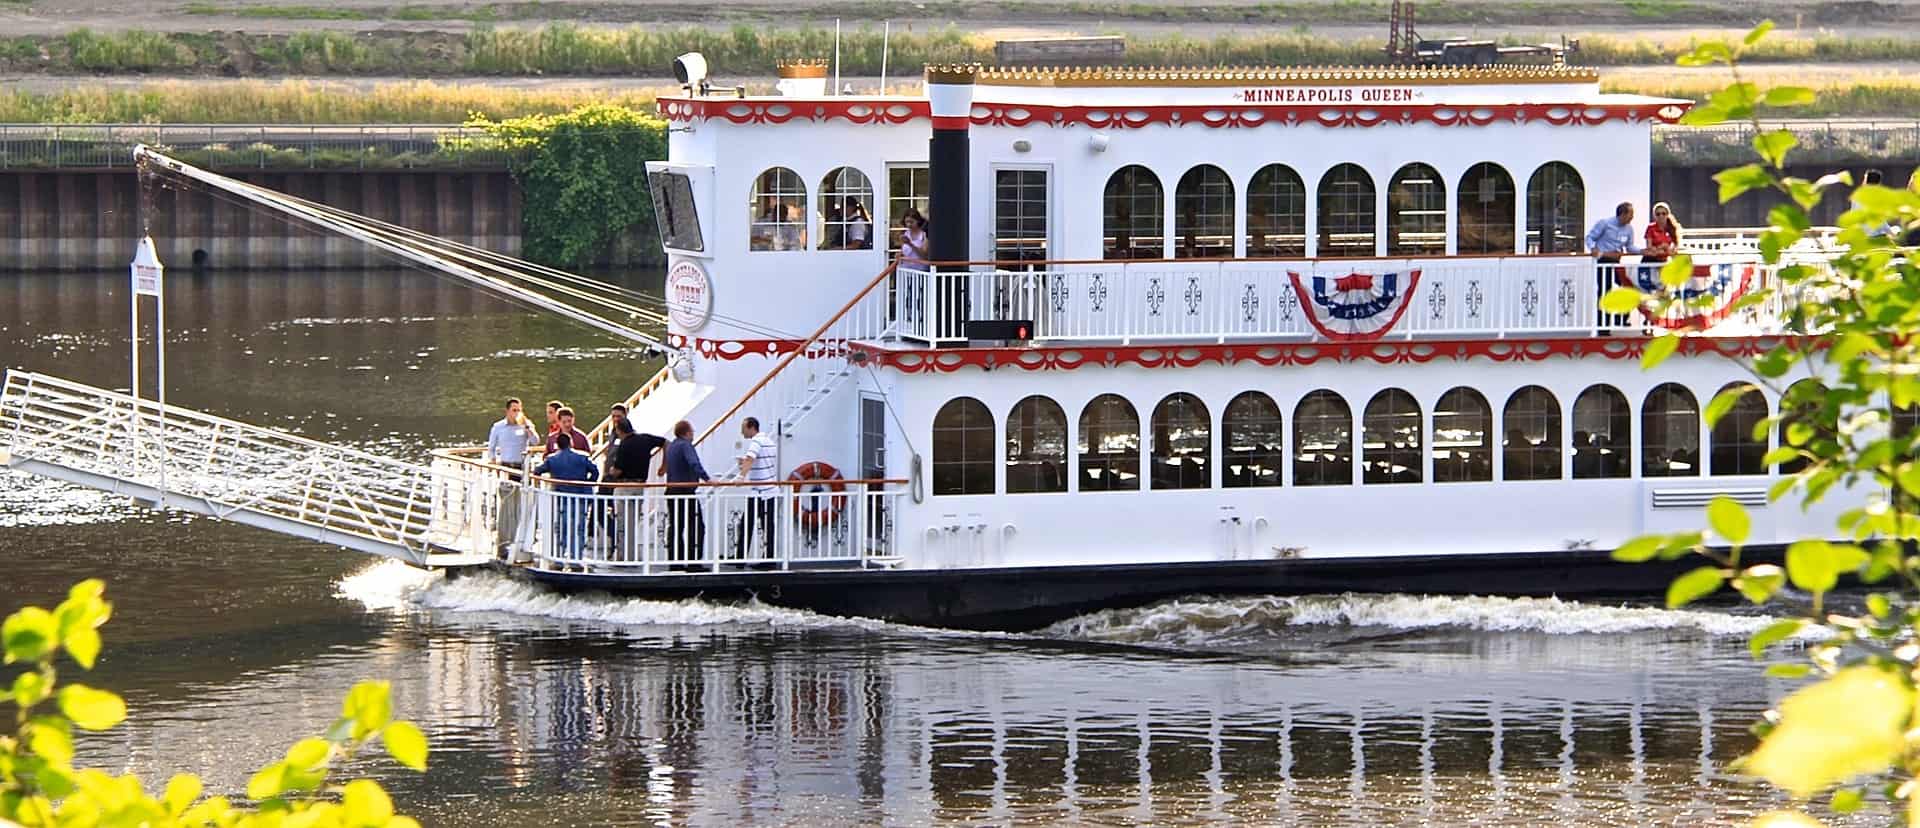 Best things to do in Minneapolis Minnesota Minneapolis Queen riverboat tour courtesy of skeeze on Pixabay